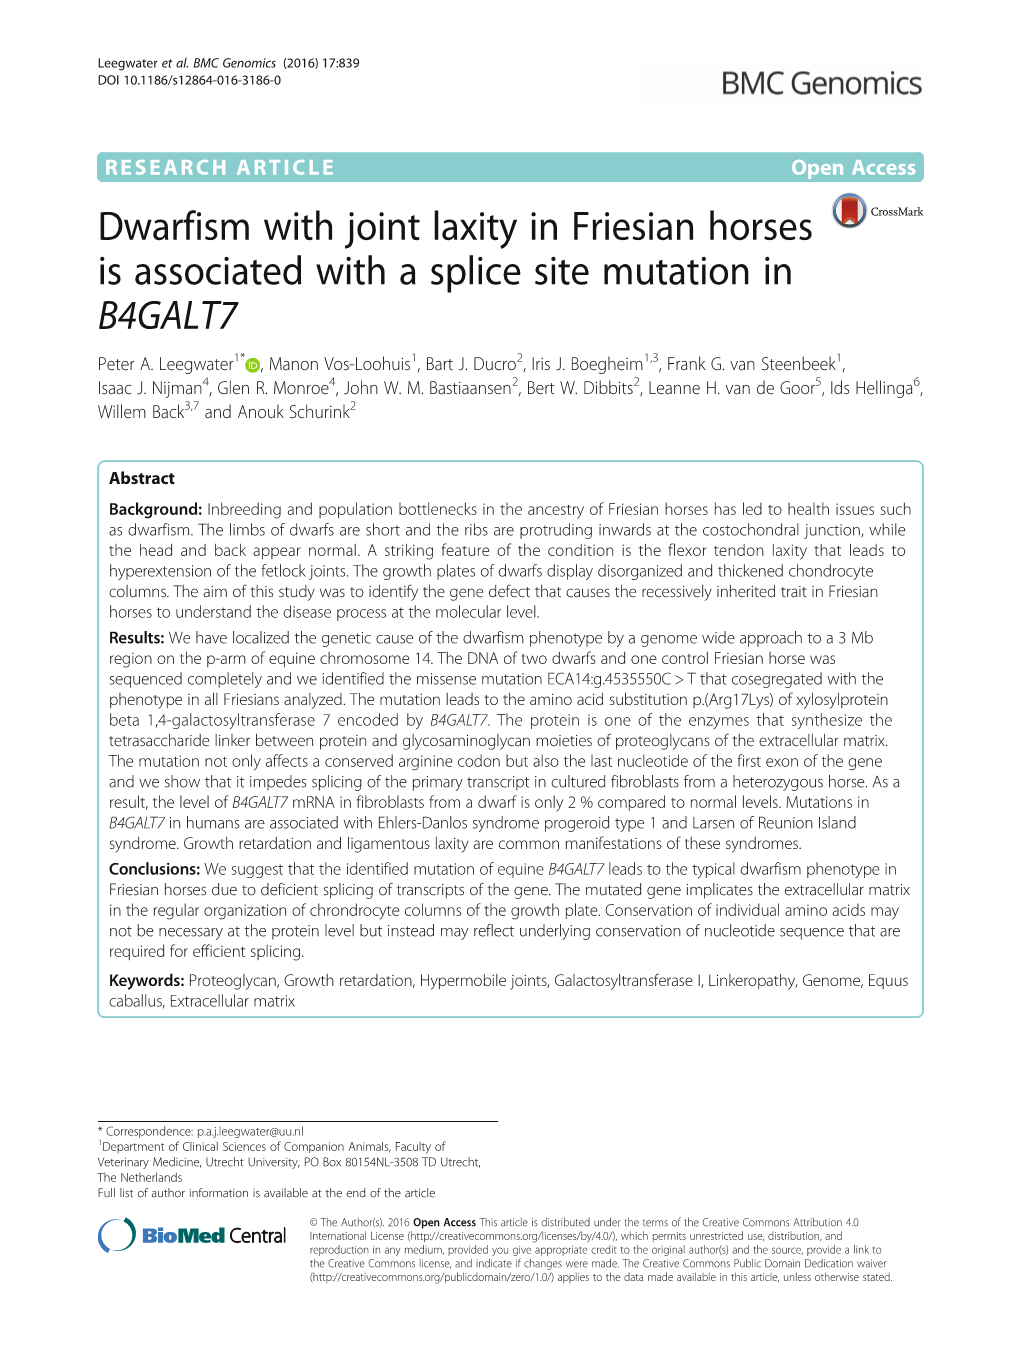 Dwarfism with Joint Laxity in Friesian Horses Is Associated with a Splice Site Mutation in B4GALT7